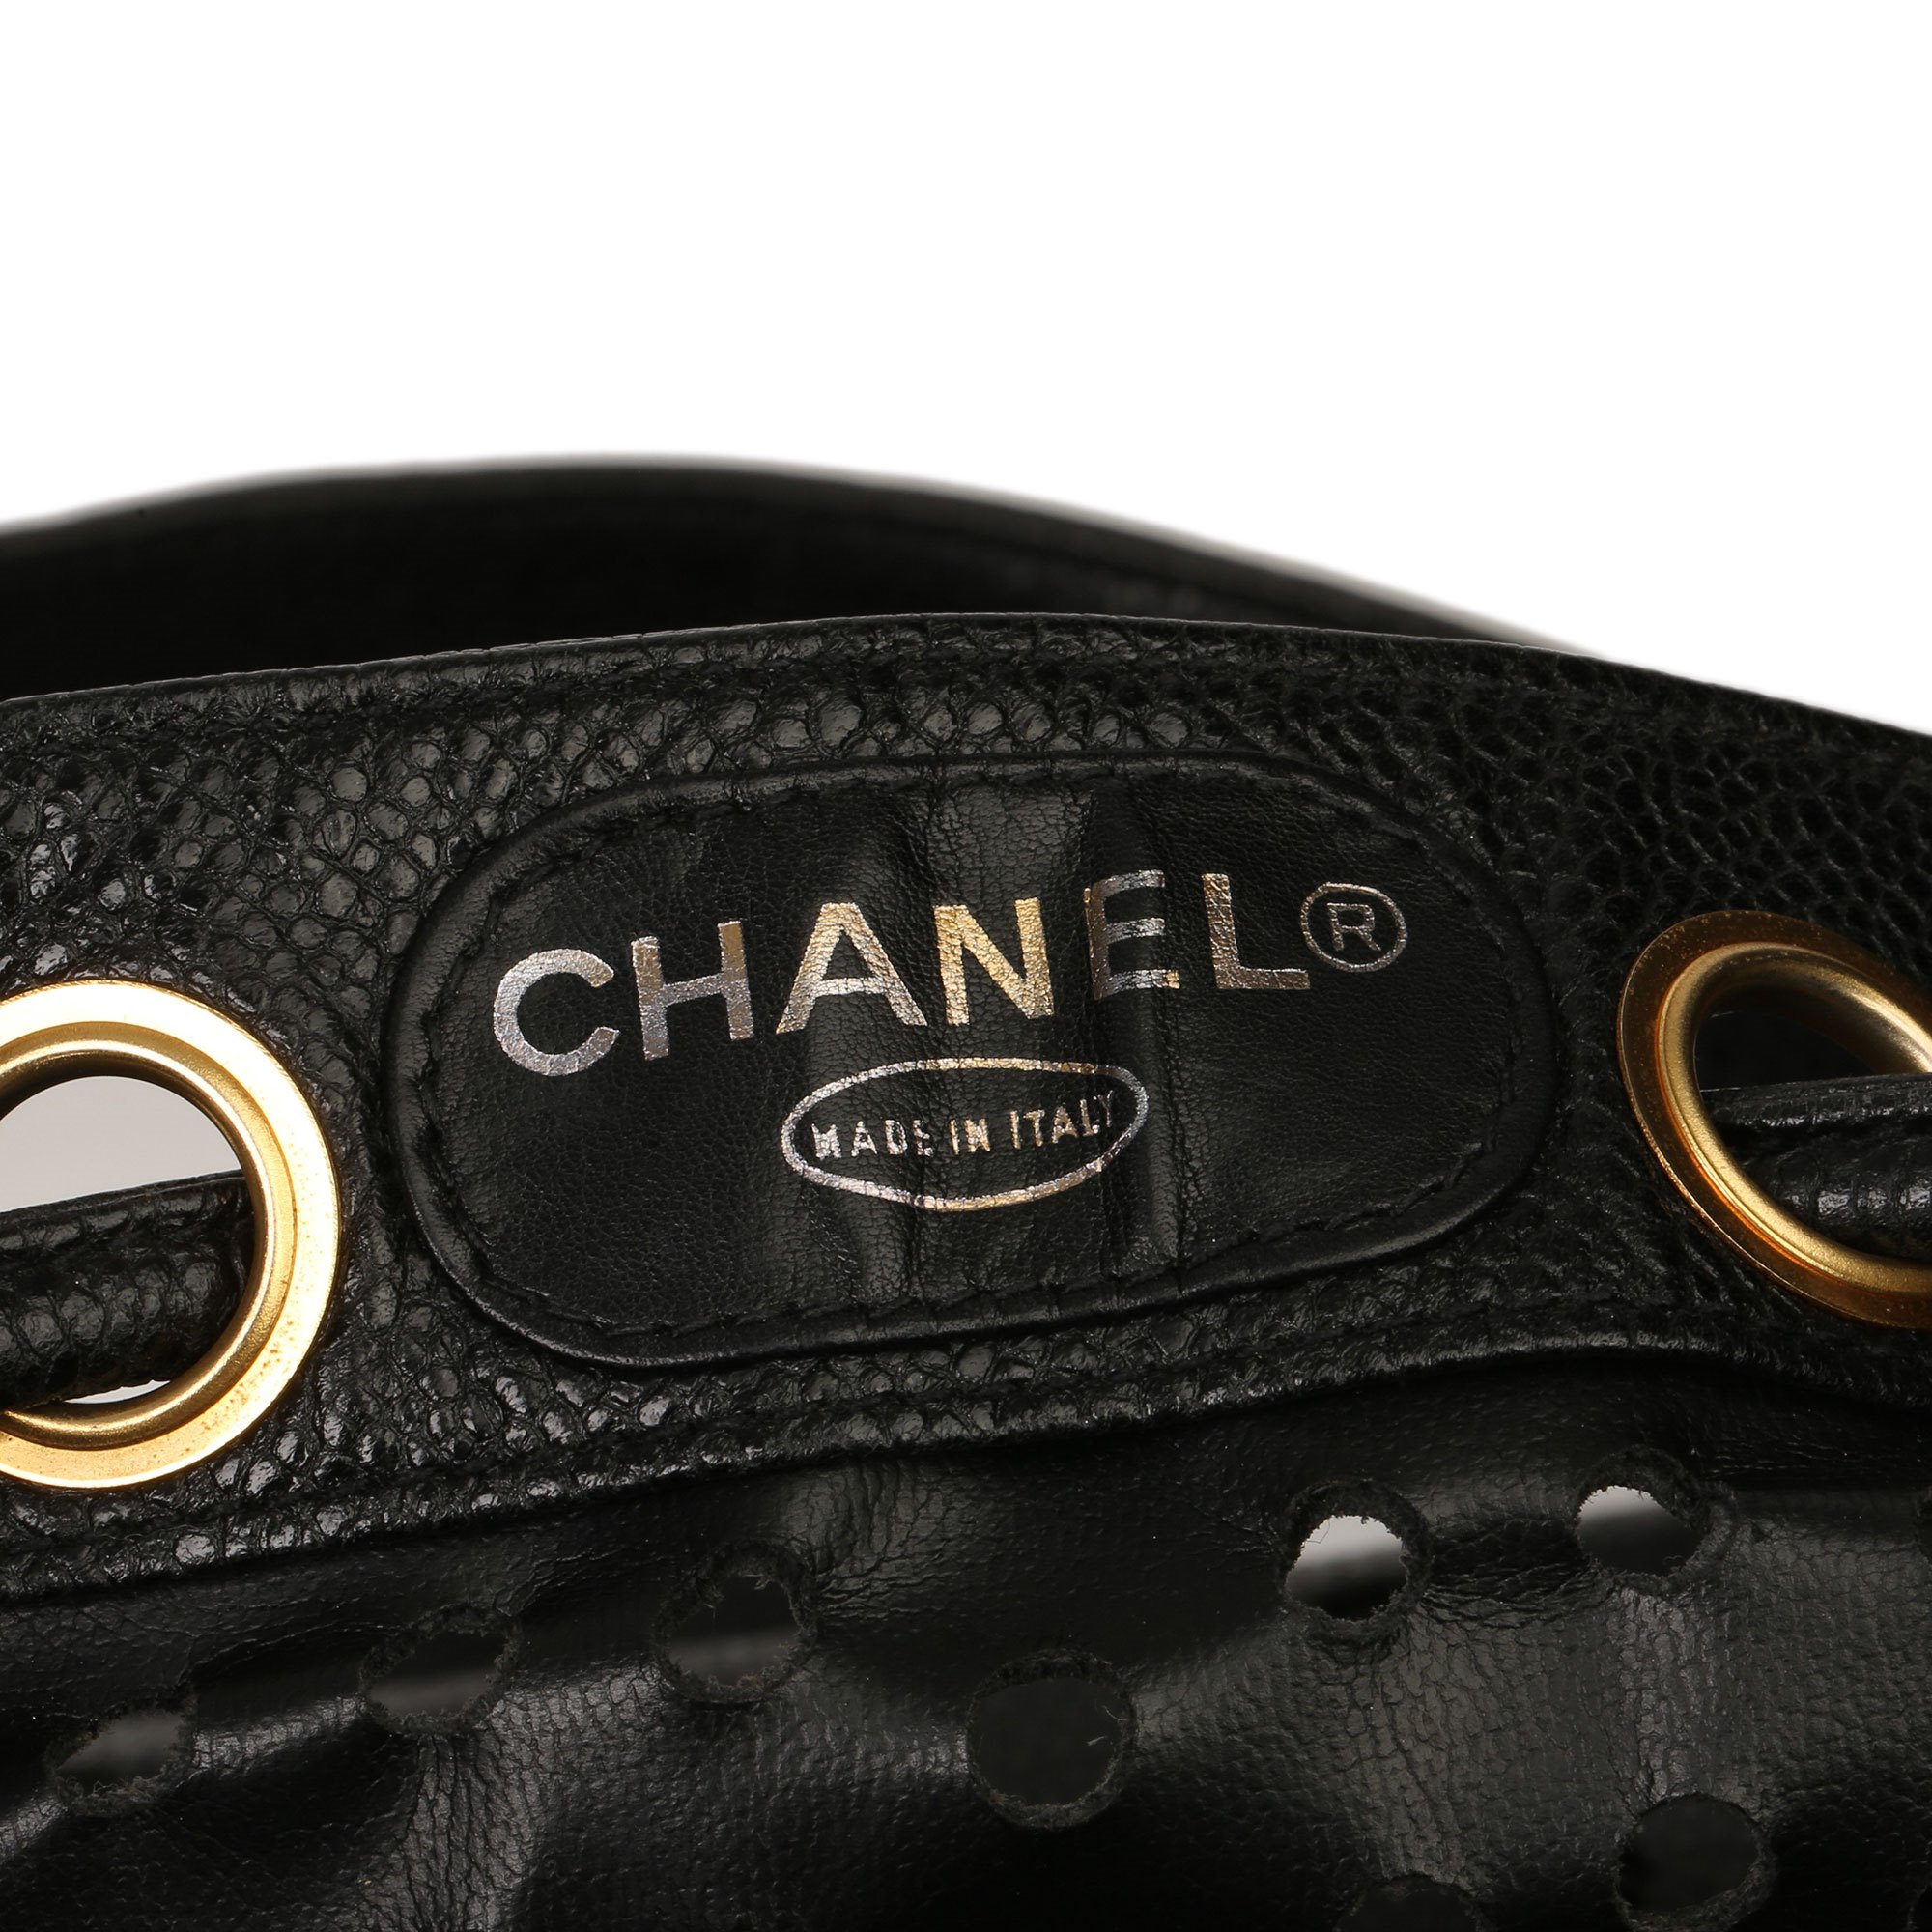 Chanel Black CC Perforated Caviar Leather Vintage Timeless Bucket Bag